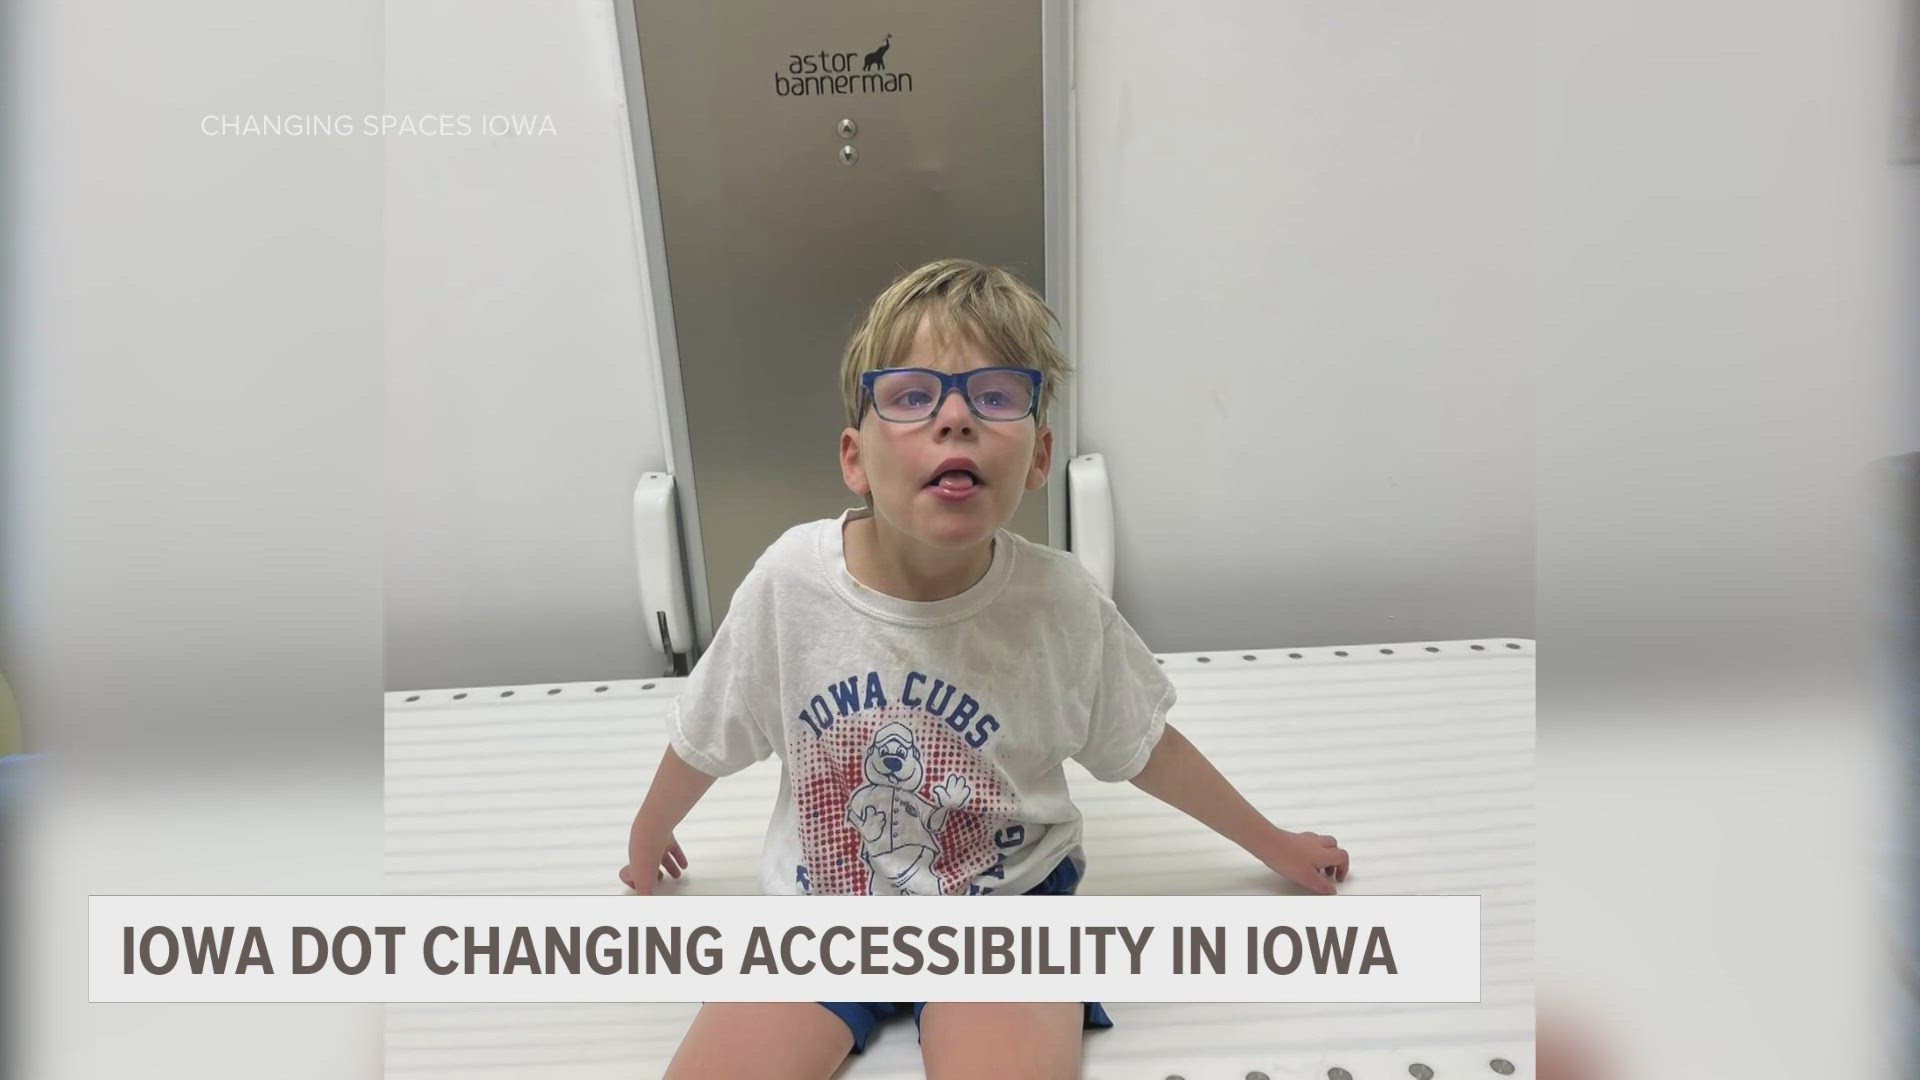 The $1 million project to install six adjustable adult changing tables at rest stops across Iowa will change many people's daily lives.